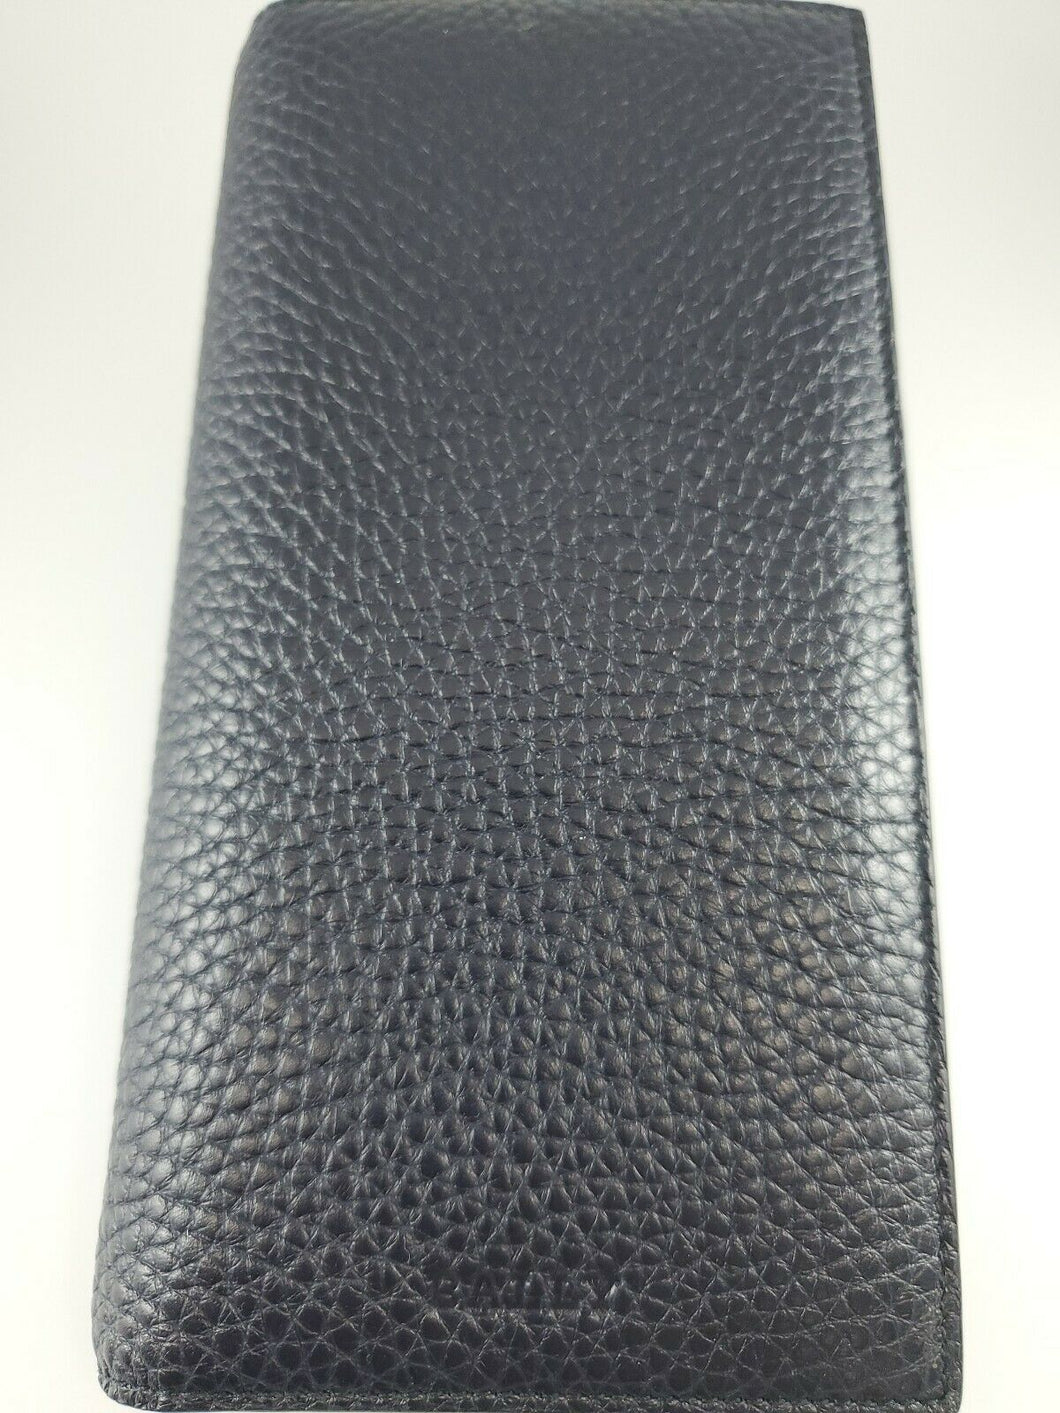 NEW Bally Straddok Men's 6208054 Continental Navy Calf Grained Leather Wallet MSRP $480